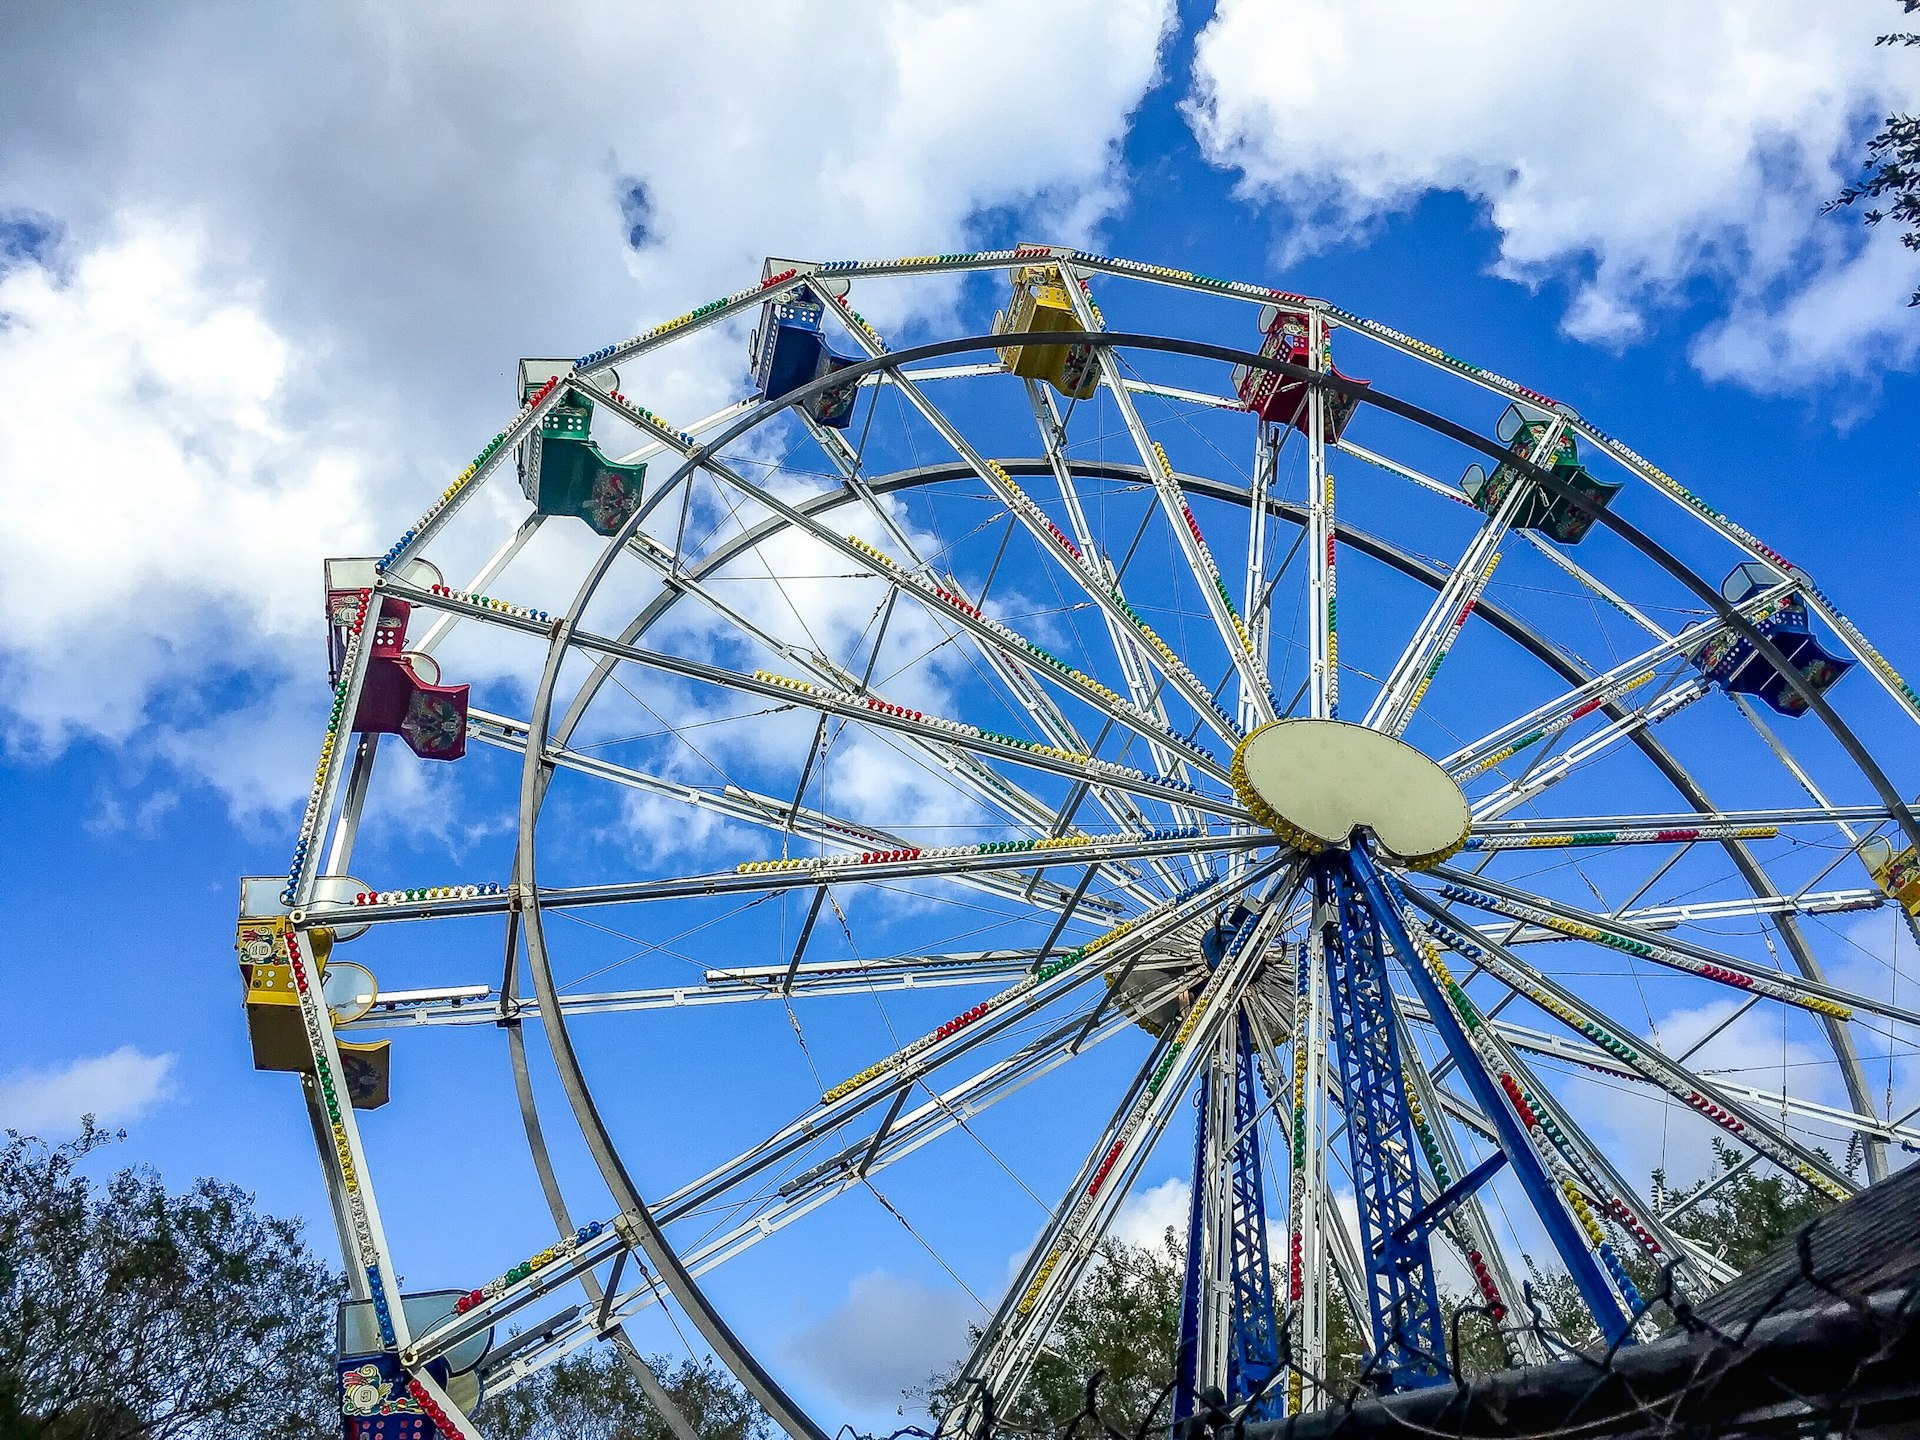 A ferris wheel in Carousel Gardens in City Park is pictured.